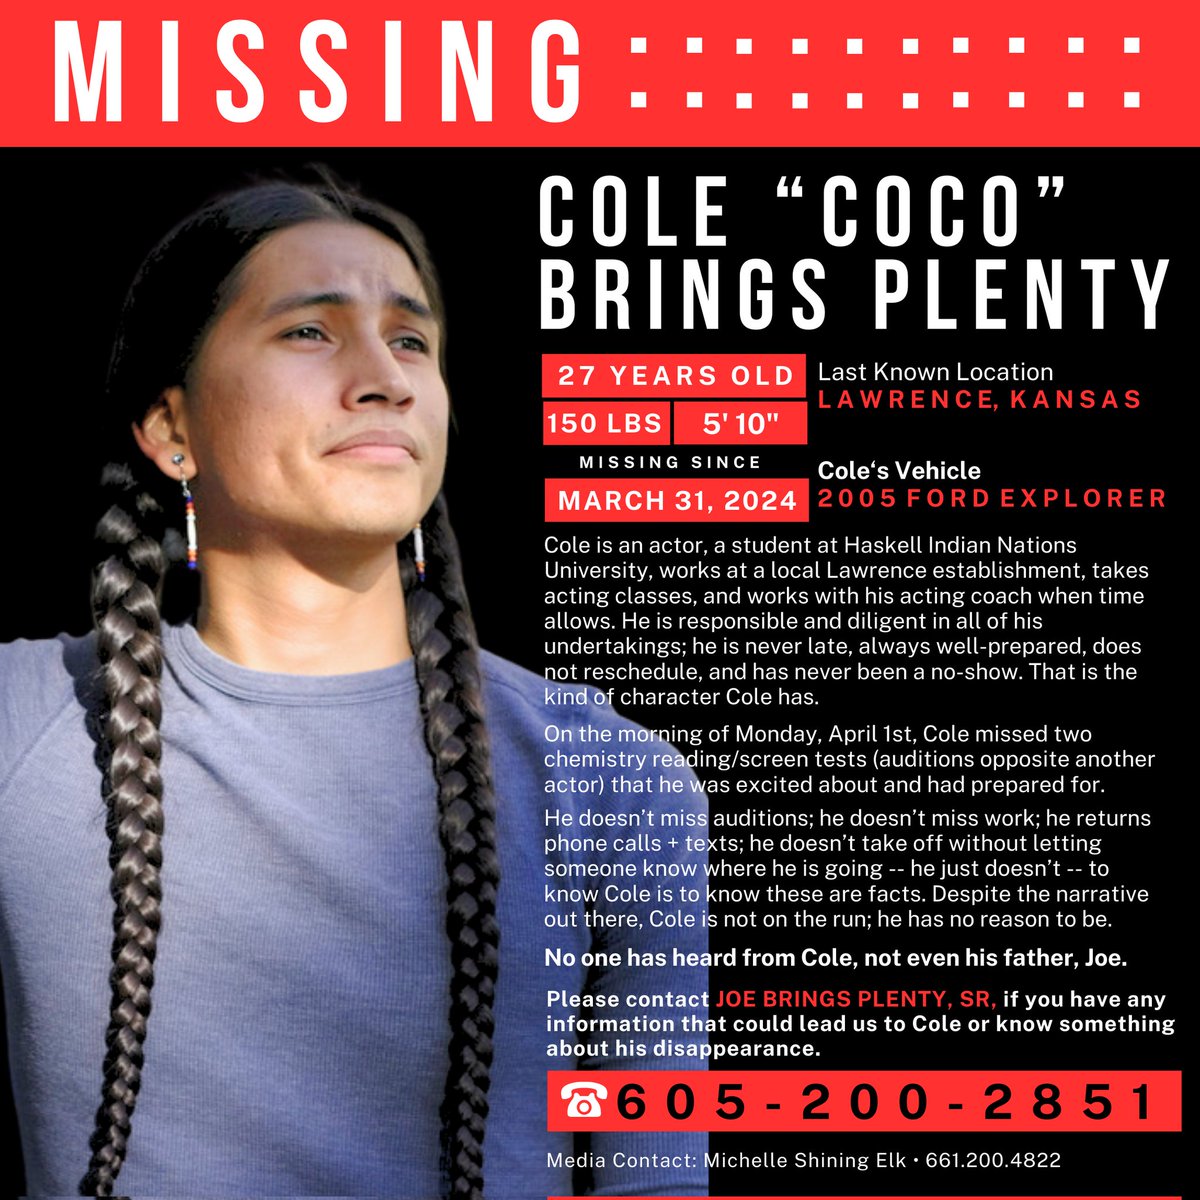 MISSING! PLEASE SHARE! COLE BRINGS PLENTY.